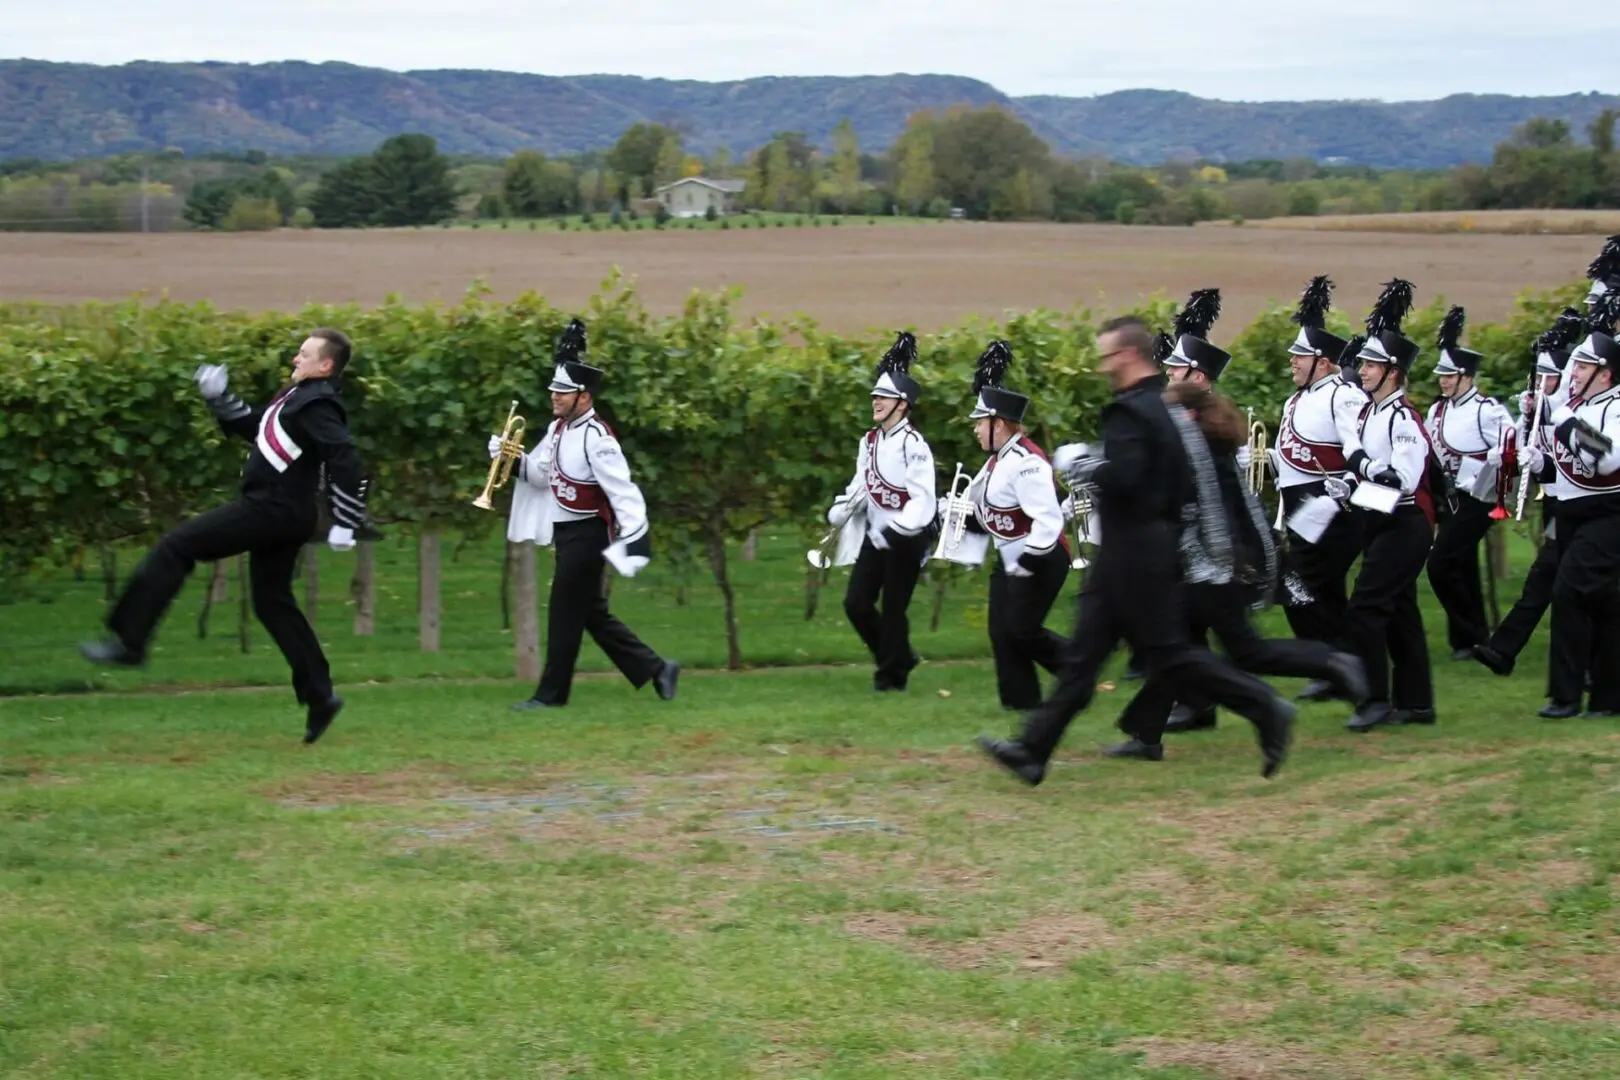 A group of marching band members running in a field.